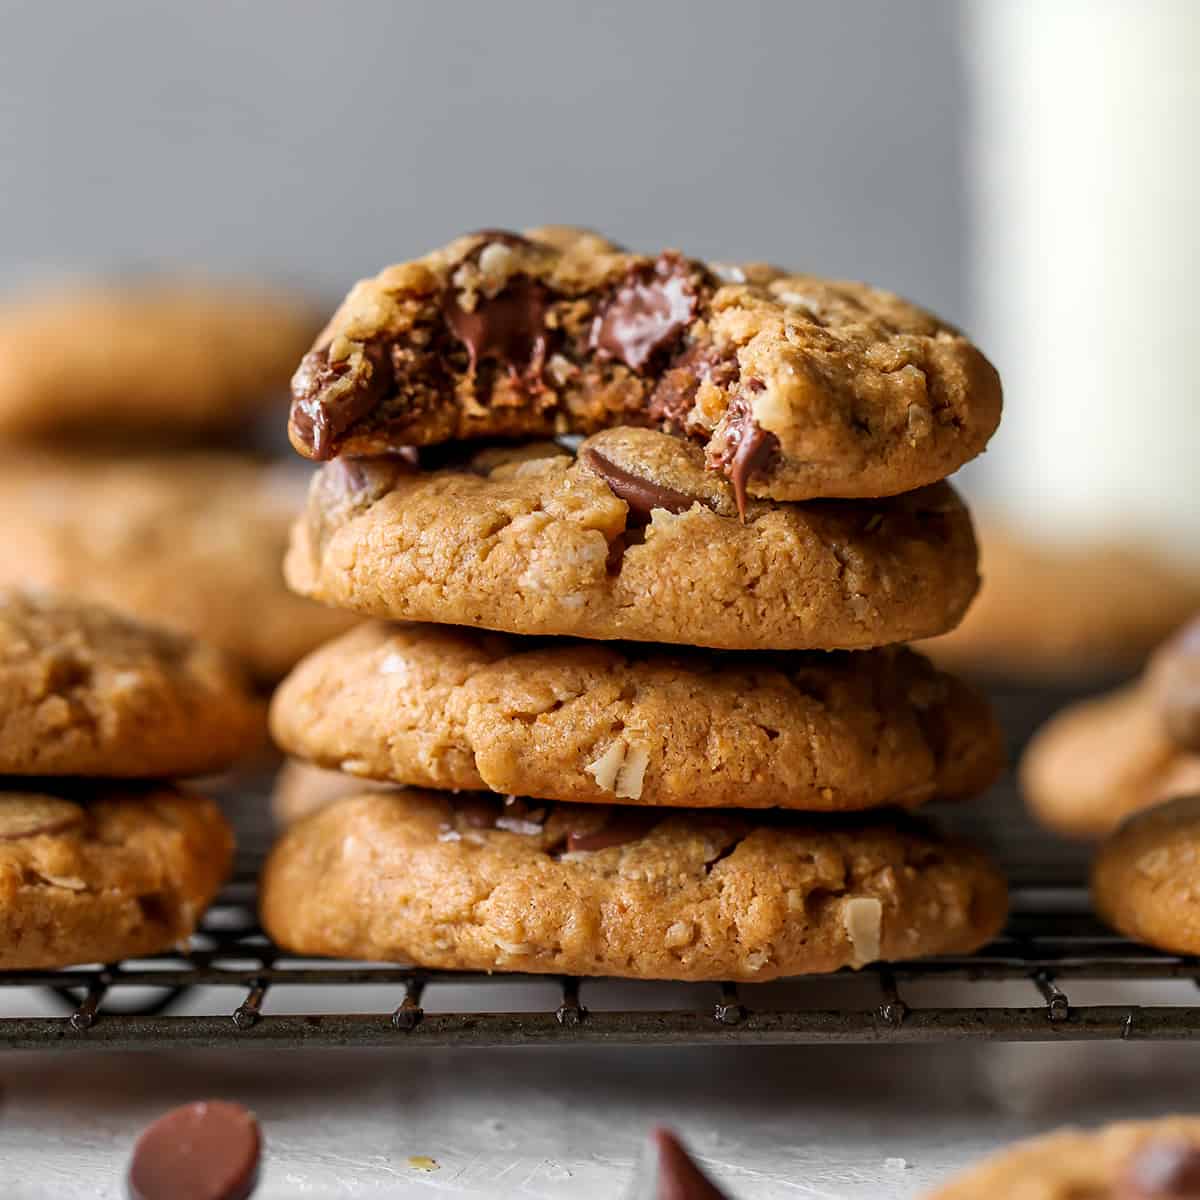 a stack of 4 Peanut Butter Oatmeal Cookies, the top one with a bite taken out of it